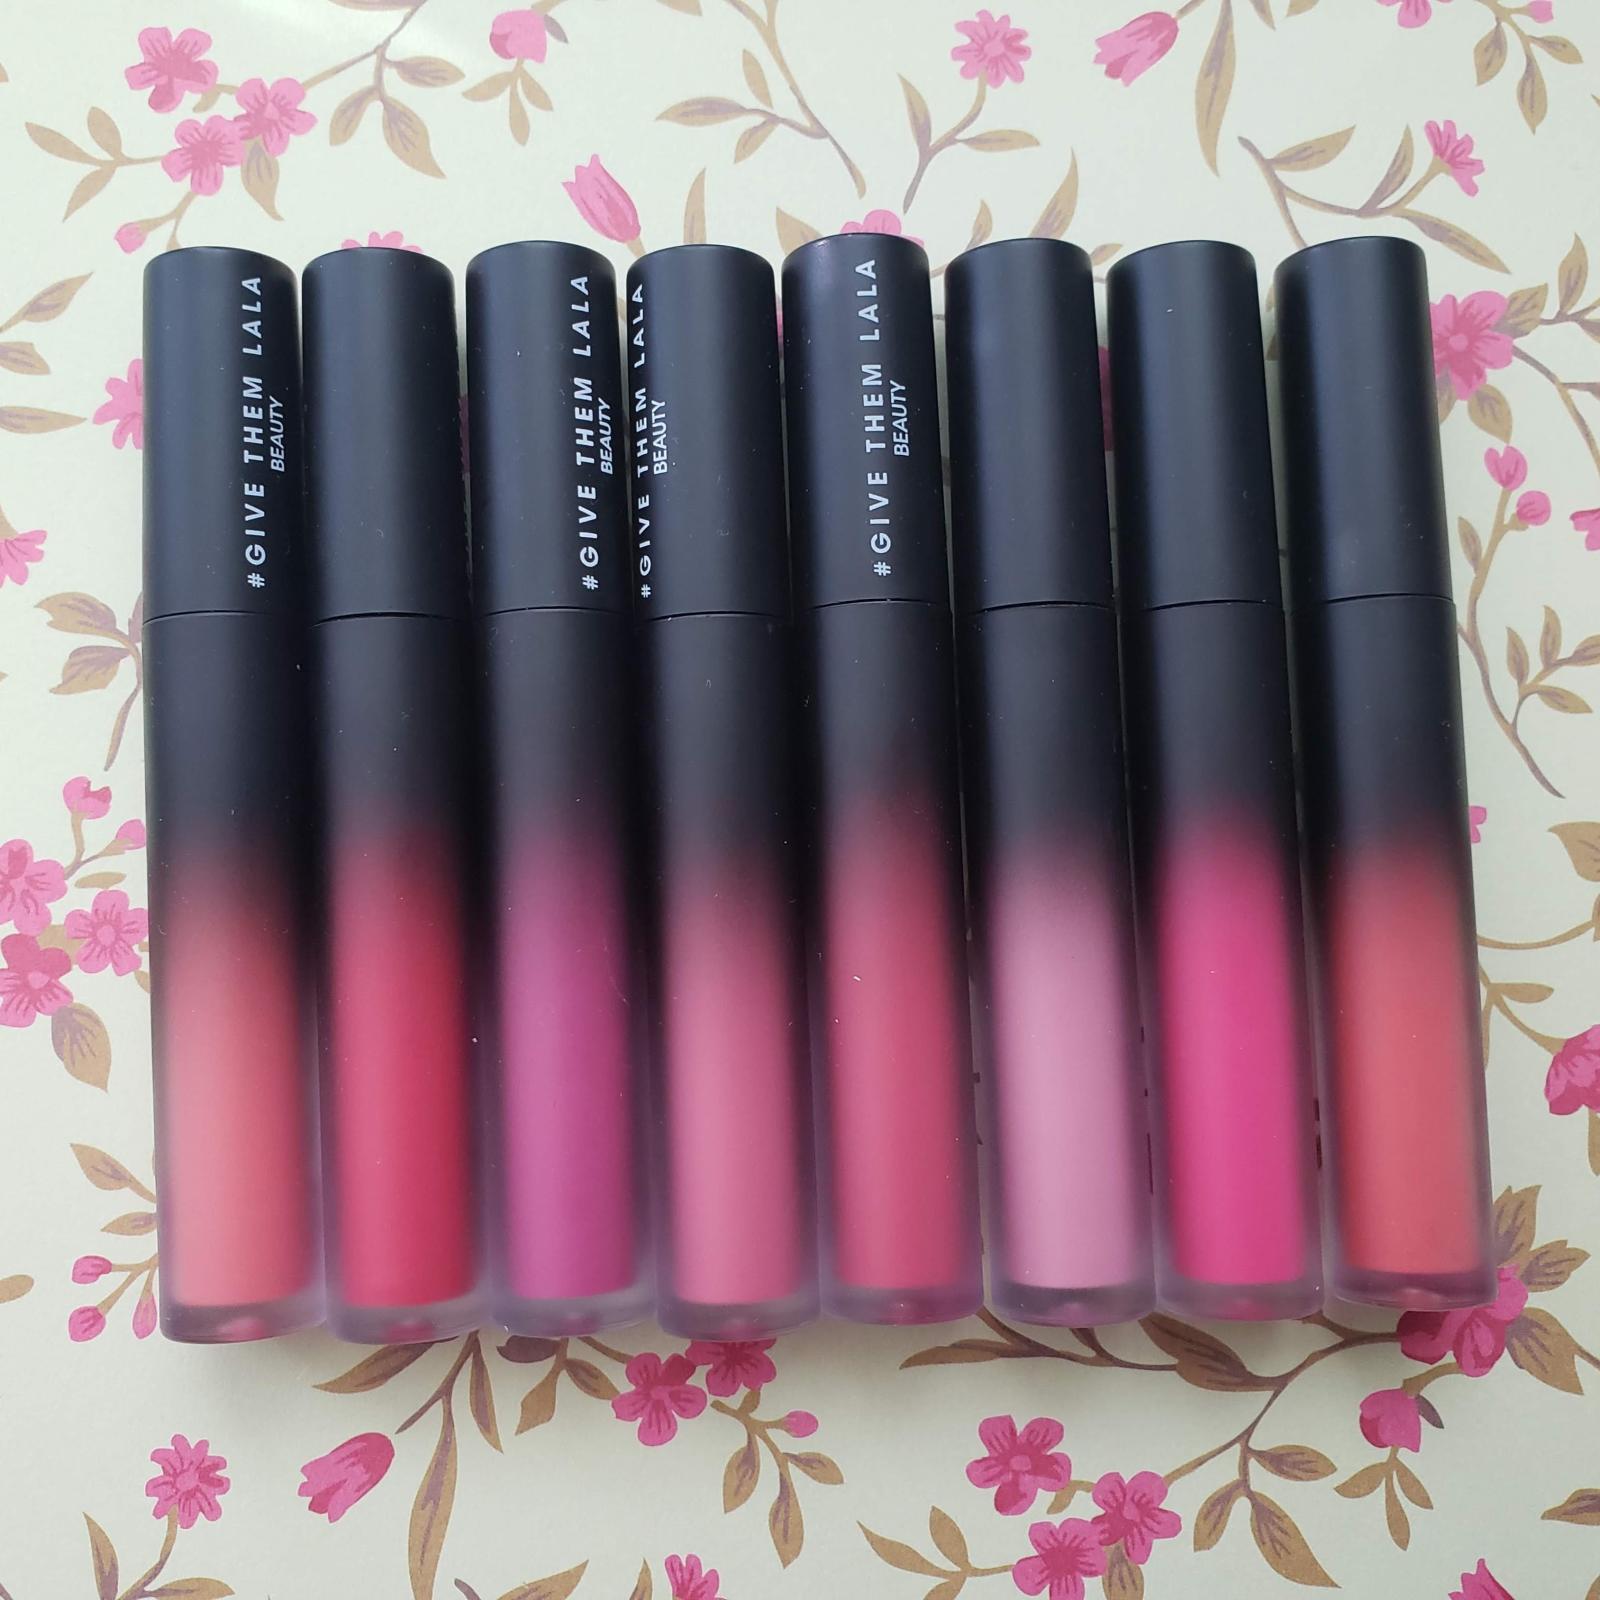 Give Them Lala Beauty Full Collection Lip Gloss And Cream Lipstick Review And Swatches Image